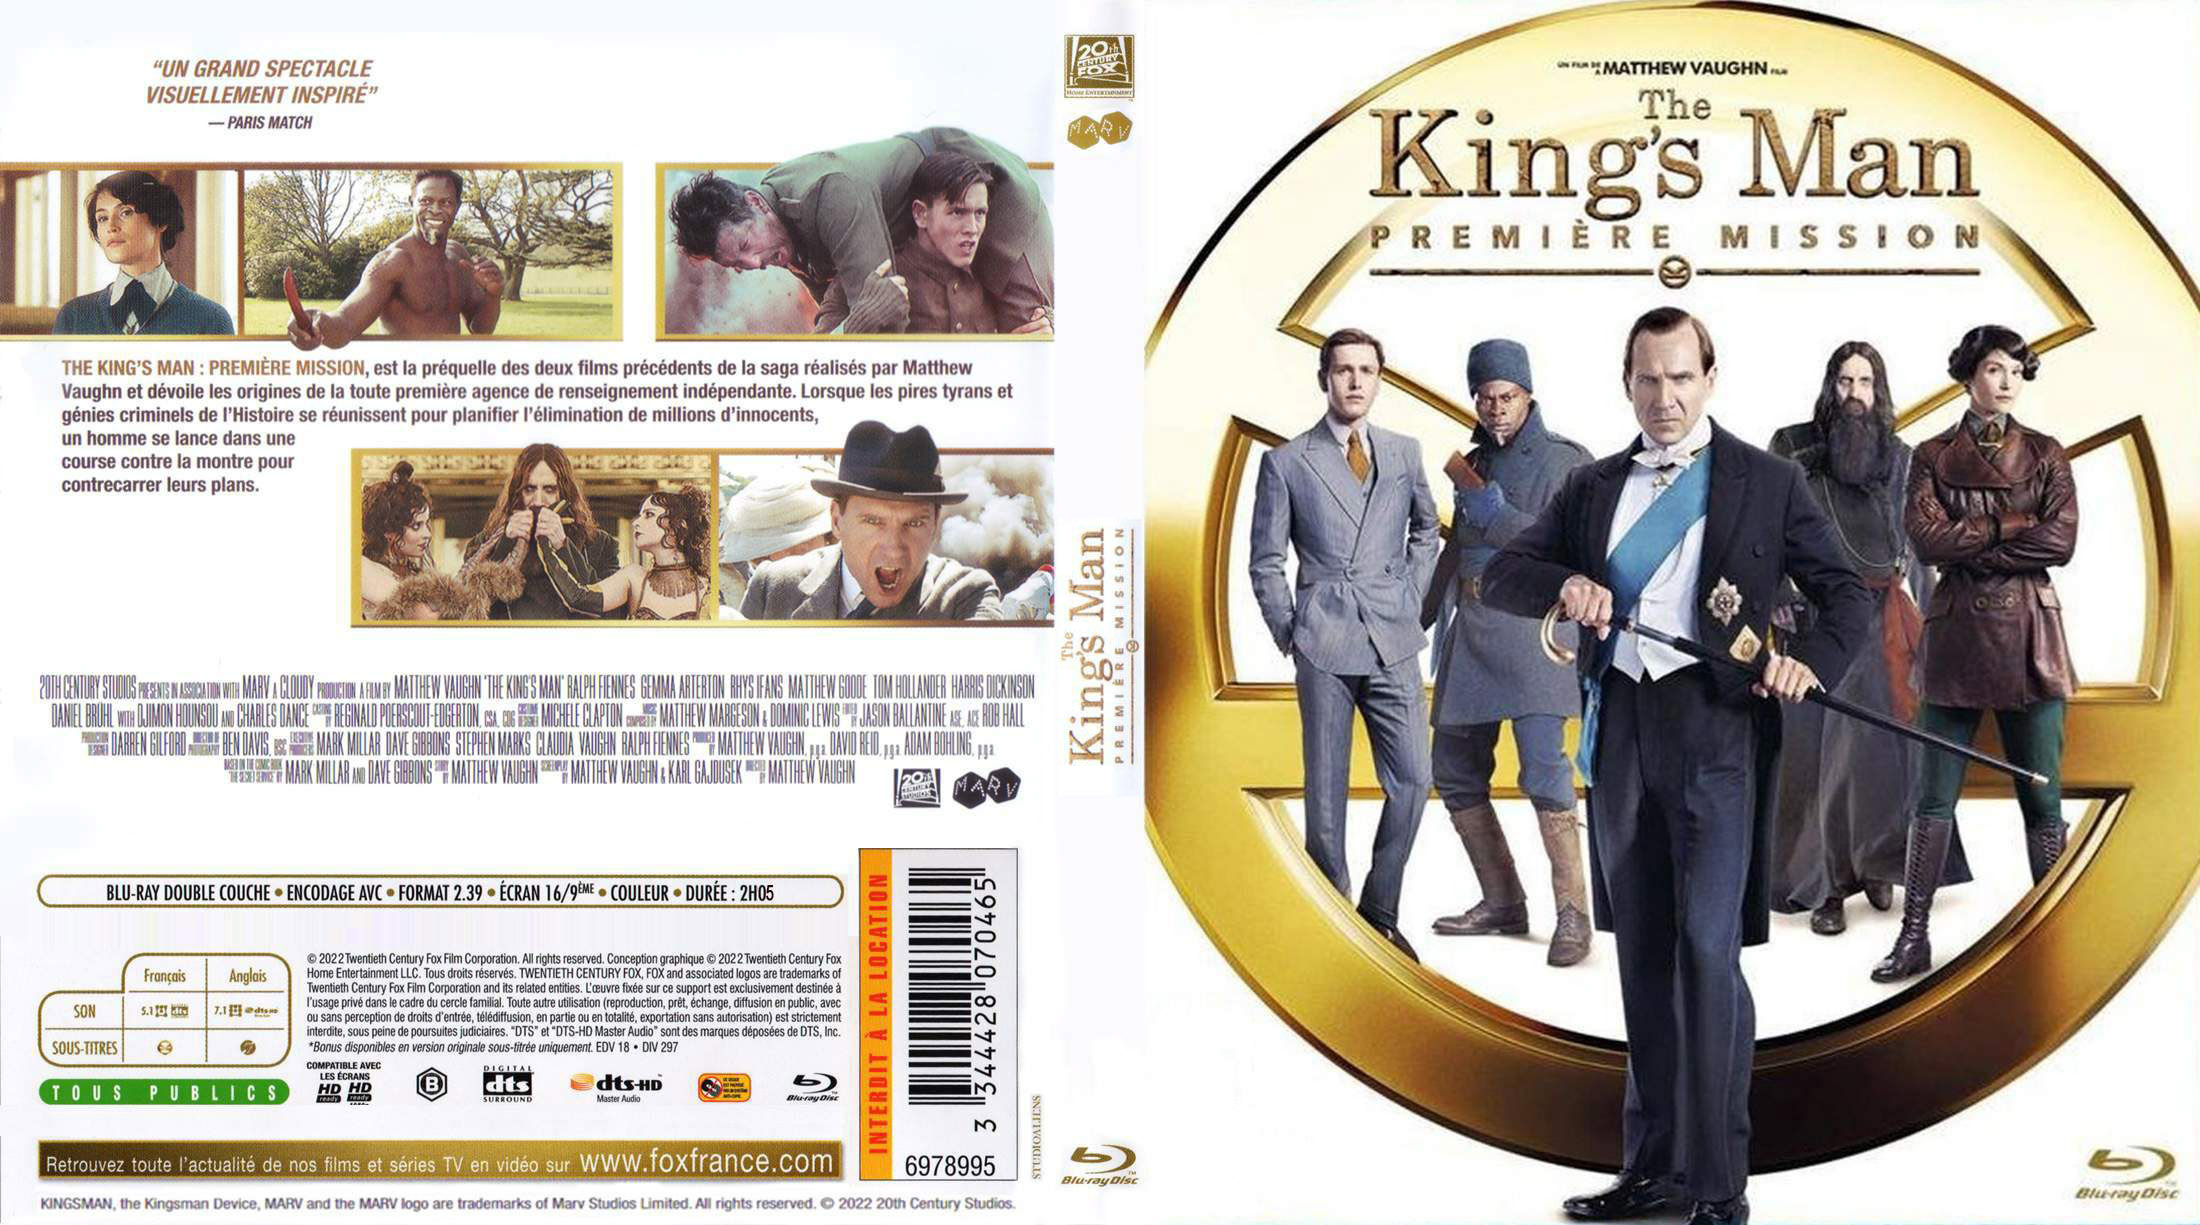 Jaquette DVD The king